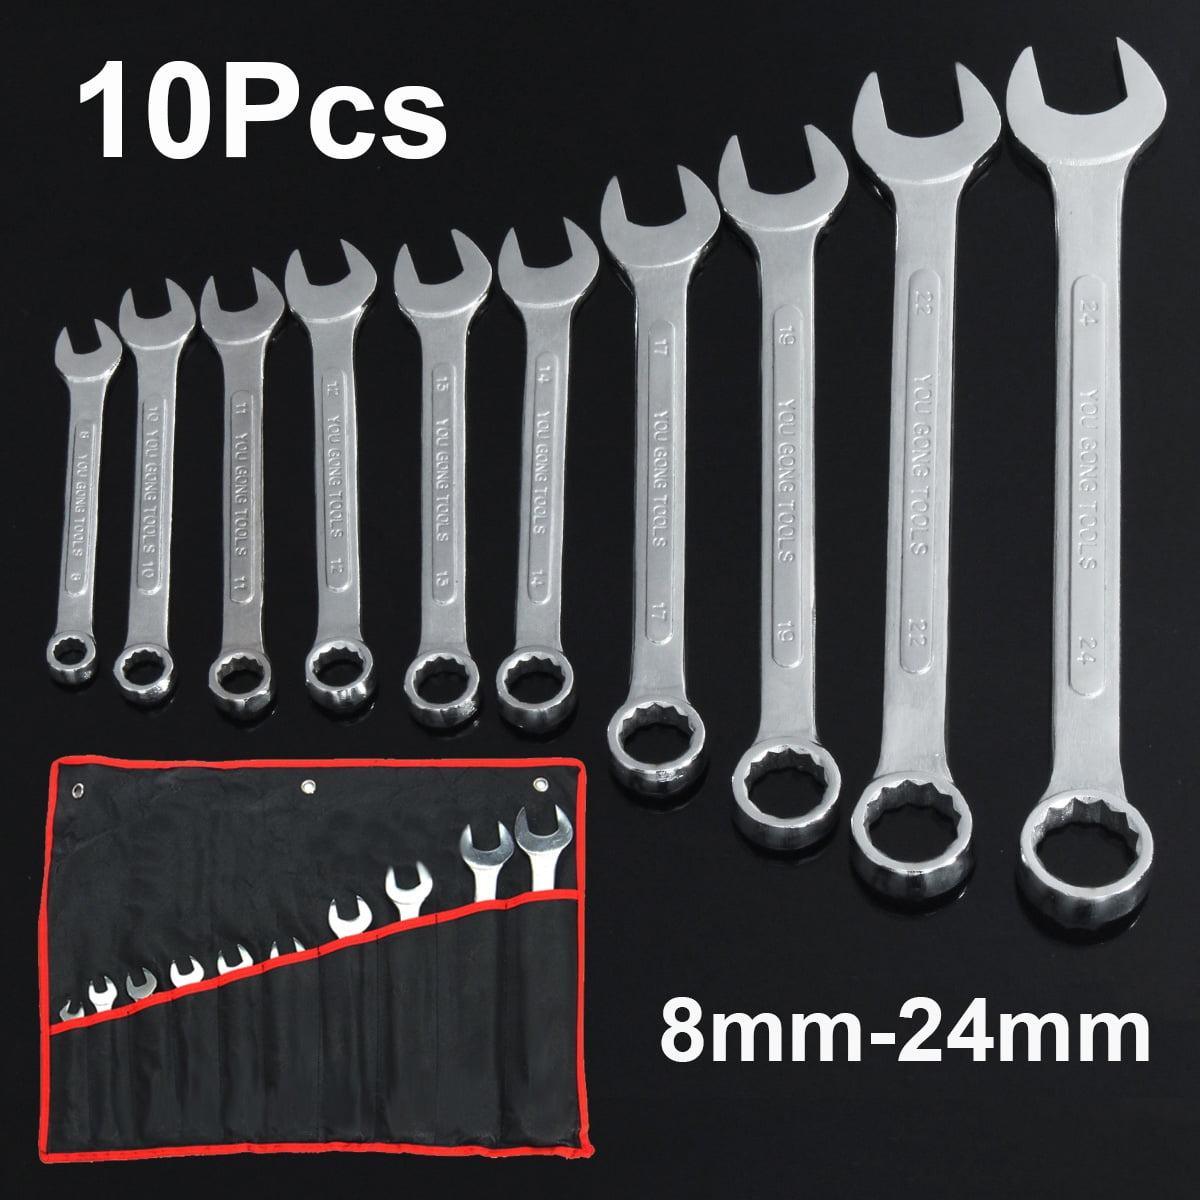 10PCS Ratchet Spanner Combination Ratcheting Flexible Head Tool Gear Wrench Set 